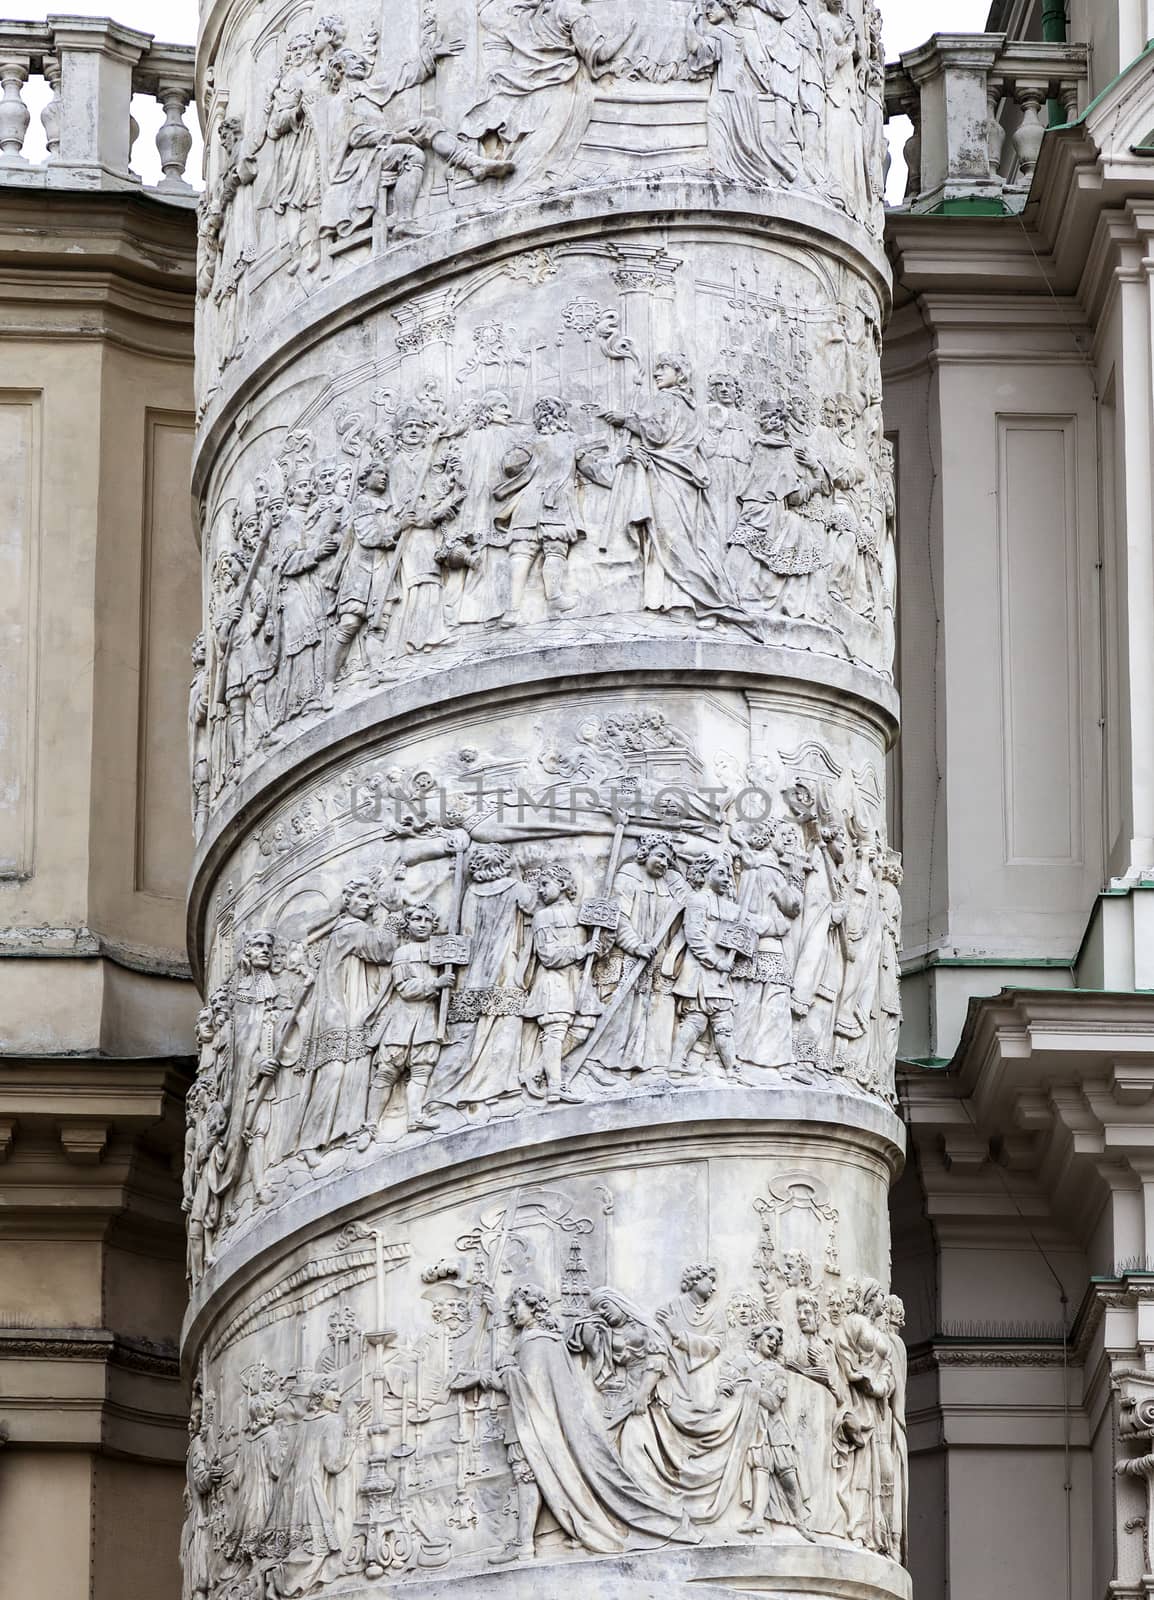 Column of the St. Charles's Church, Vienna by Goodday